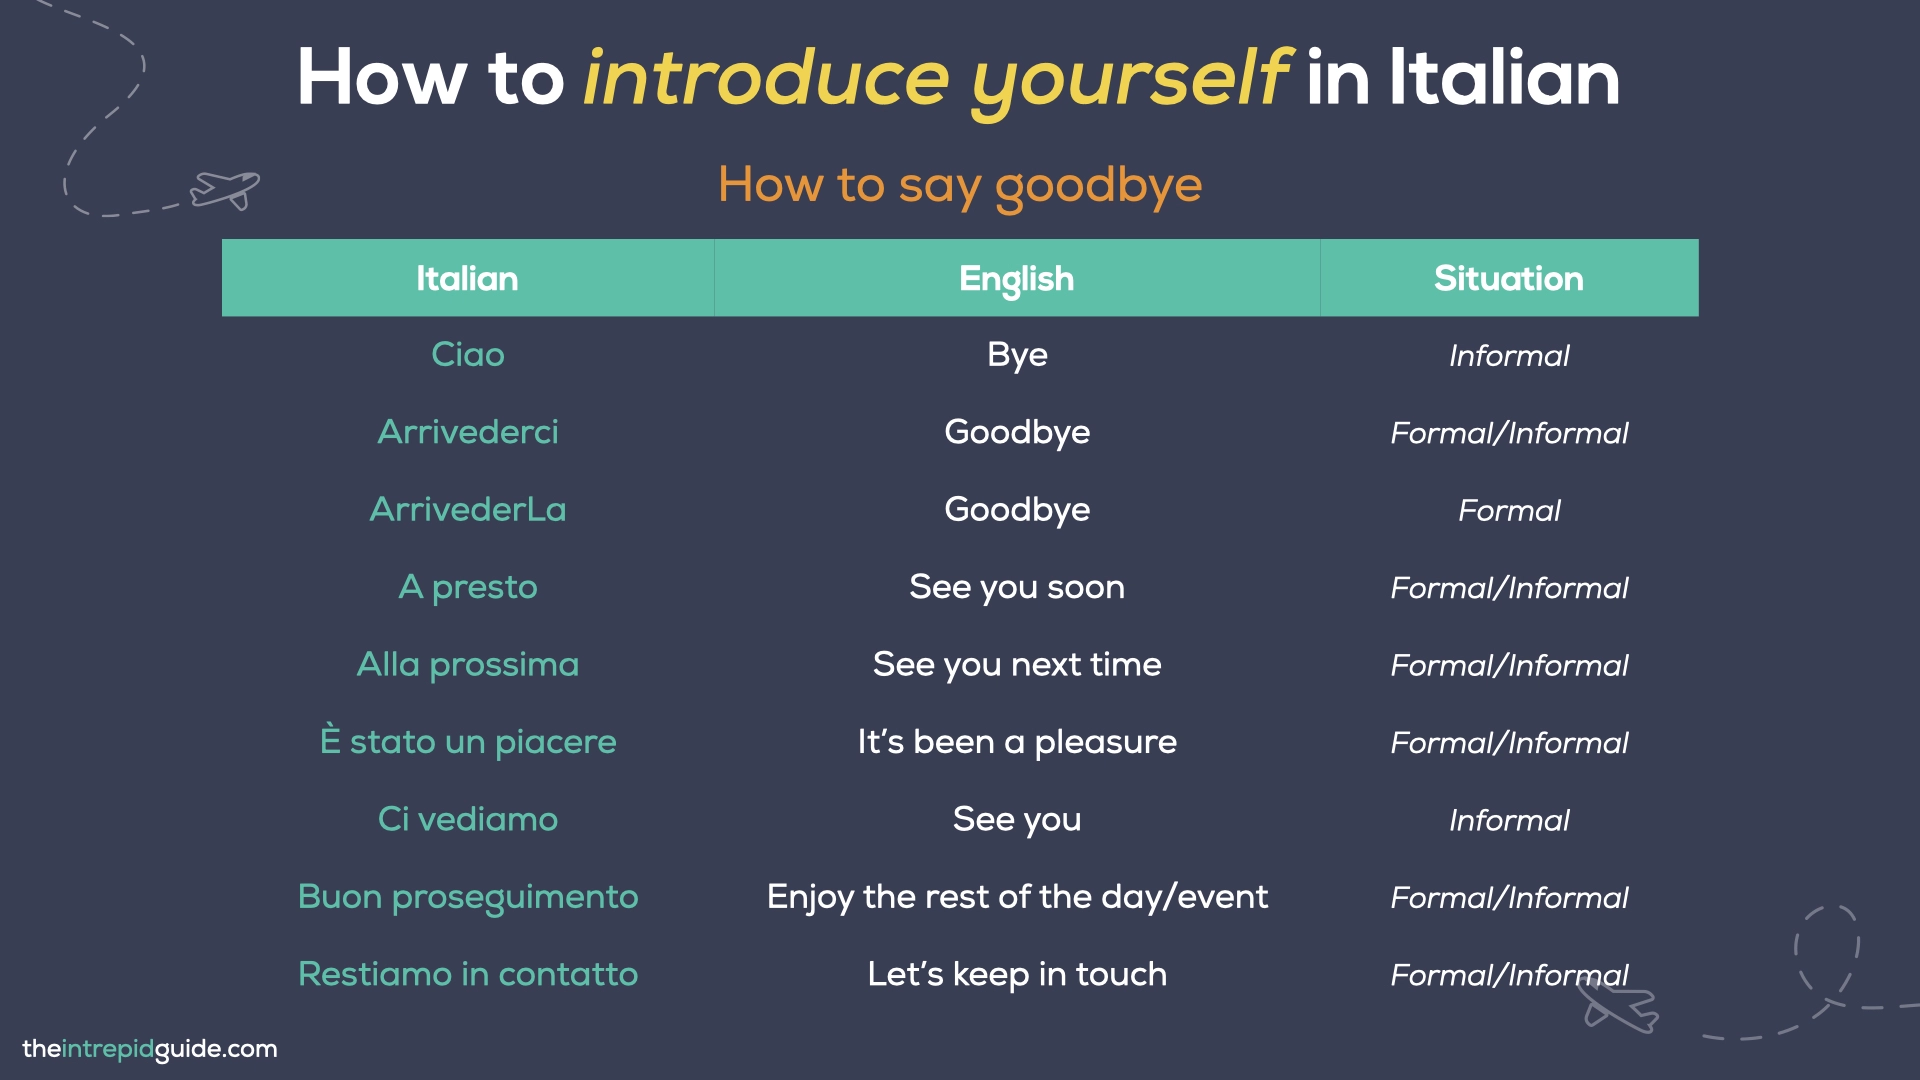 How to introduce yourself in Italian - How to say goodbye Italian